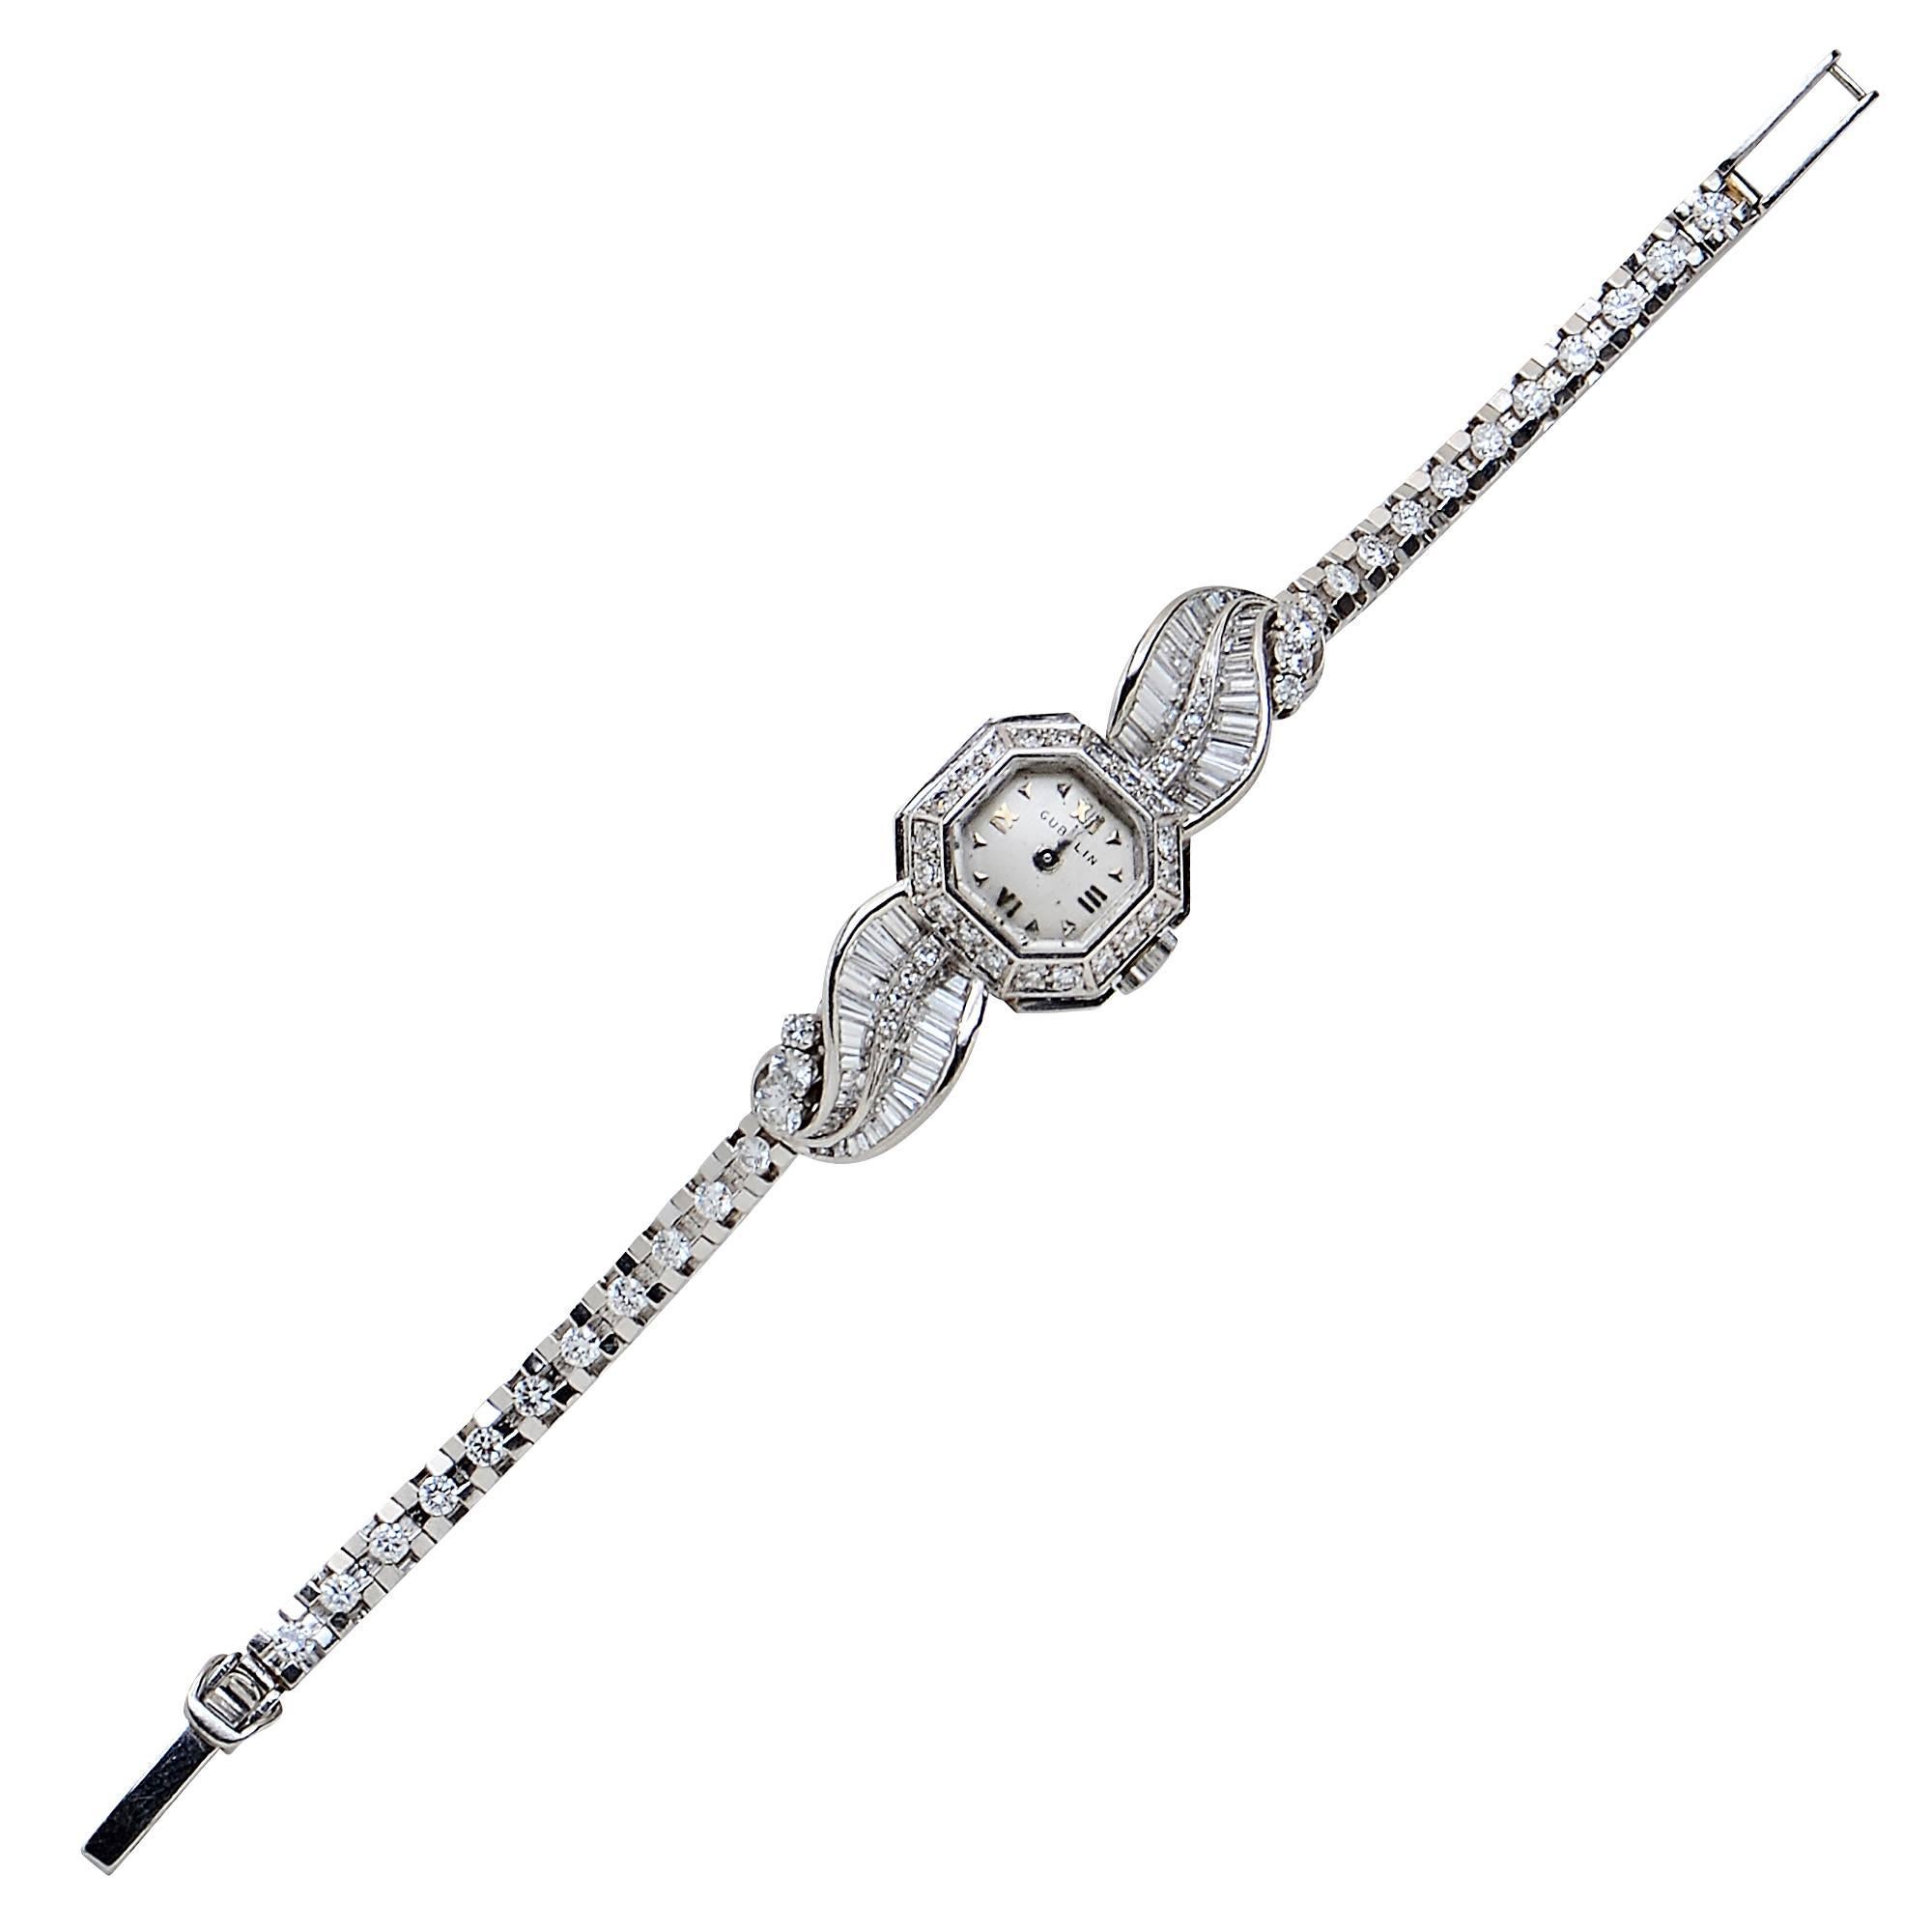 Platinum Gubelin Diamond Ladies Watch Featuring 98 Mix Cut Diamonds Weighing Approximately 3.2 Carats.

Weight: 25.65 grams

This Watch is Accompanied by a Retail Appraisal Performed by an Accredited Gemologist.